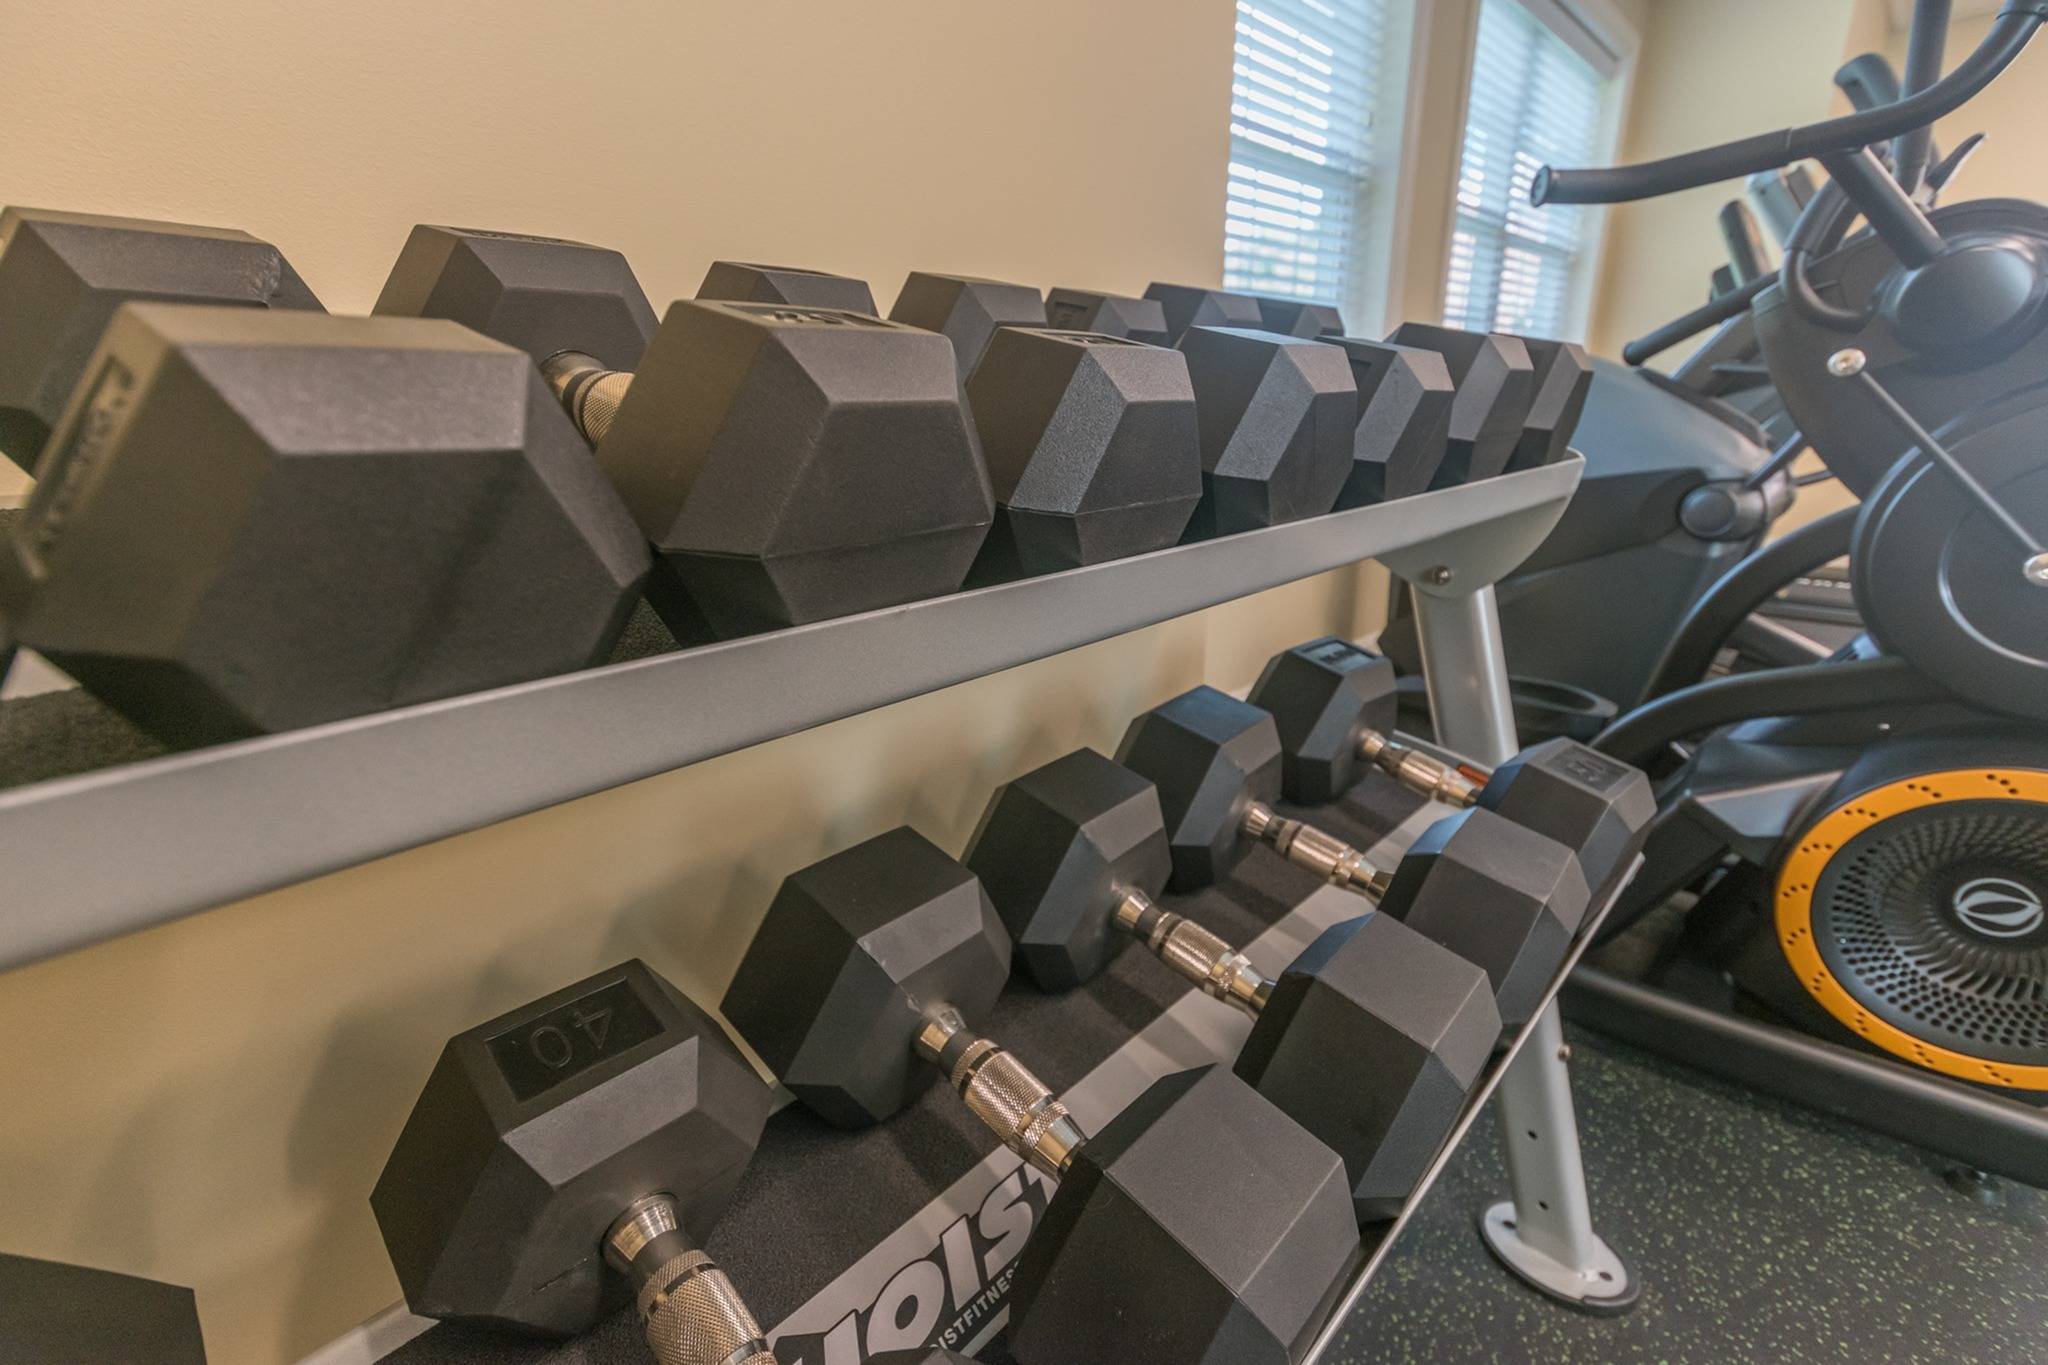 Weight rack at an indoor gym at Newport Village Apartments.